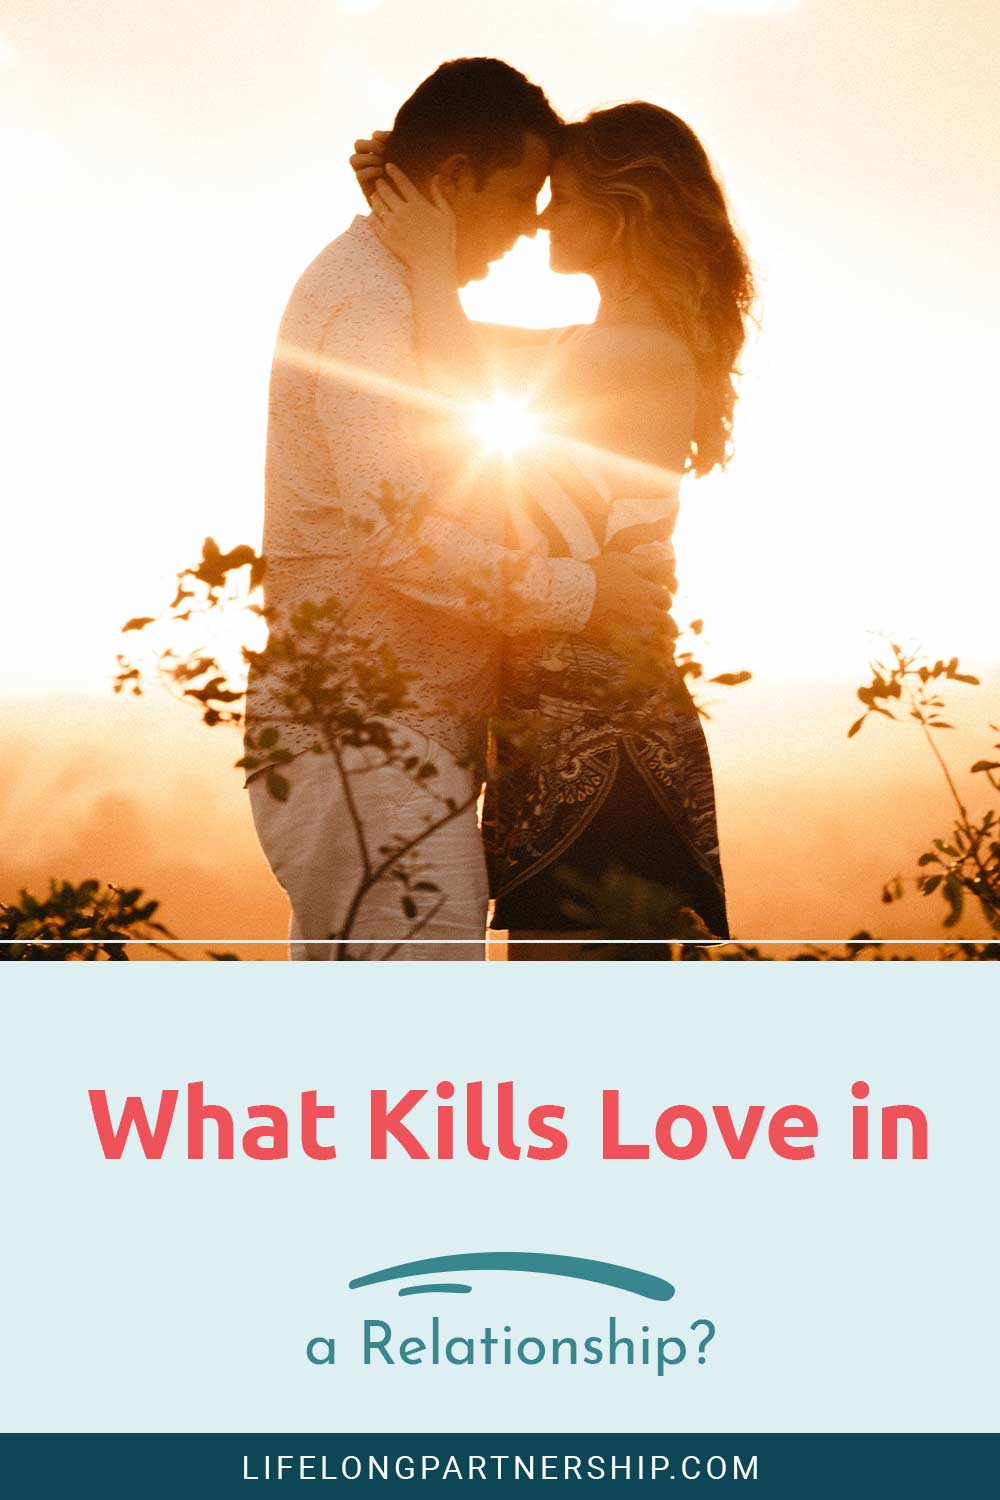 Man and woman holding each other standing in front of sun - What Kills Love in a Relationship?